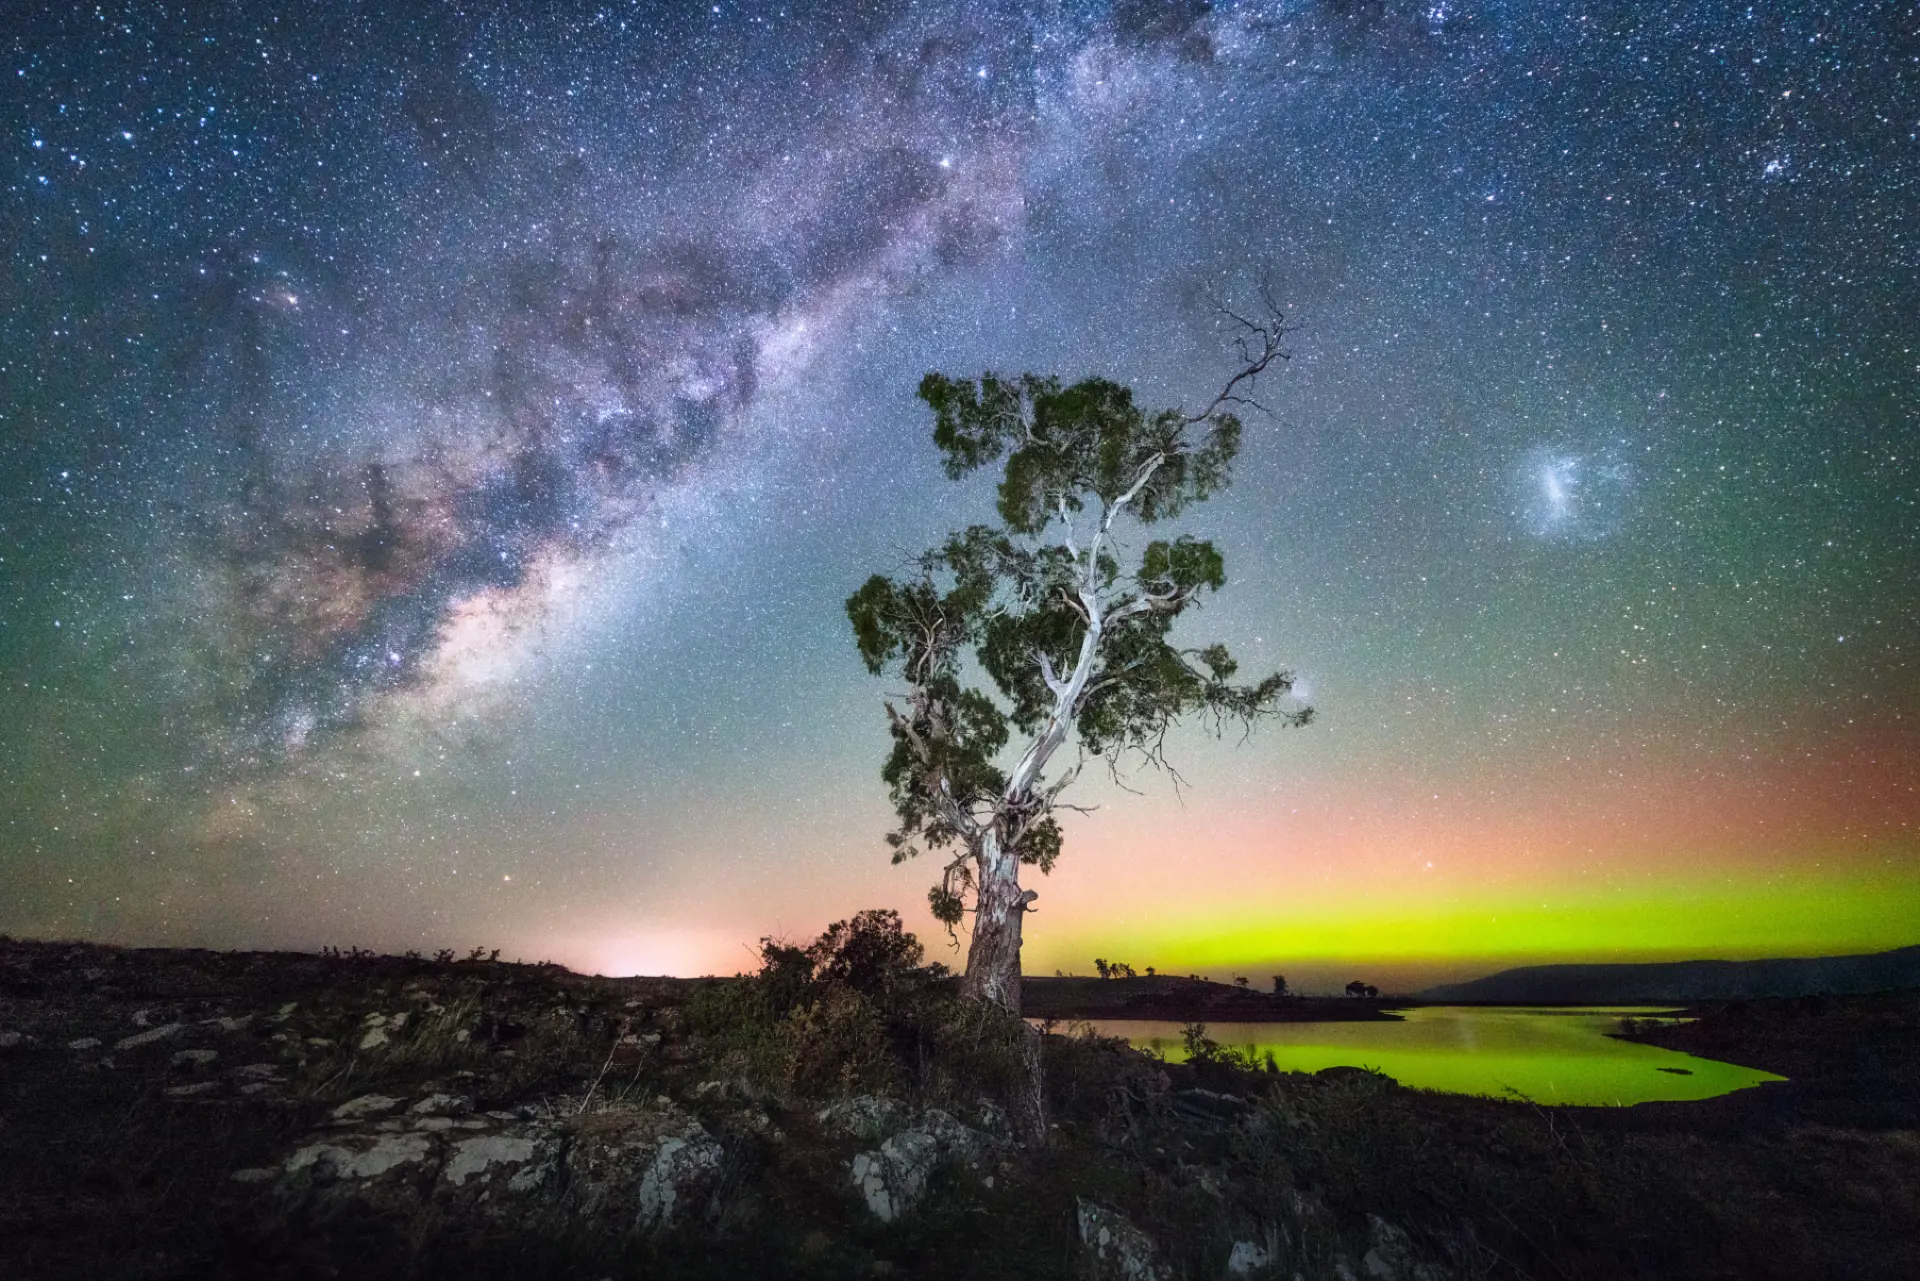 Colourful starry landscape with a large tree in the foreground